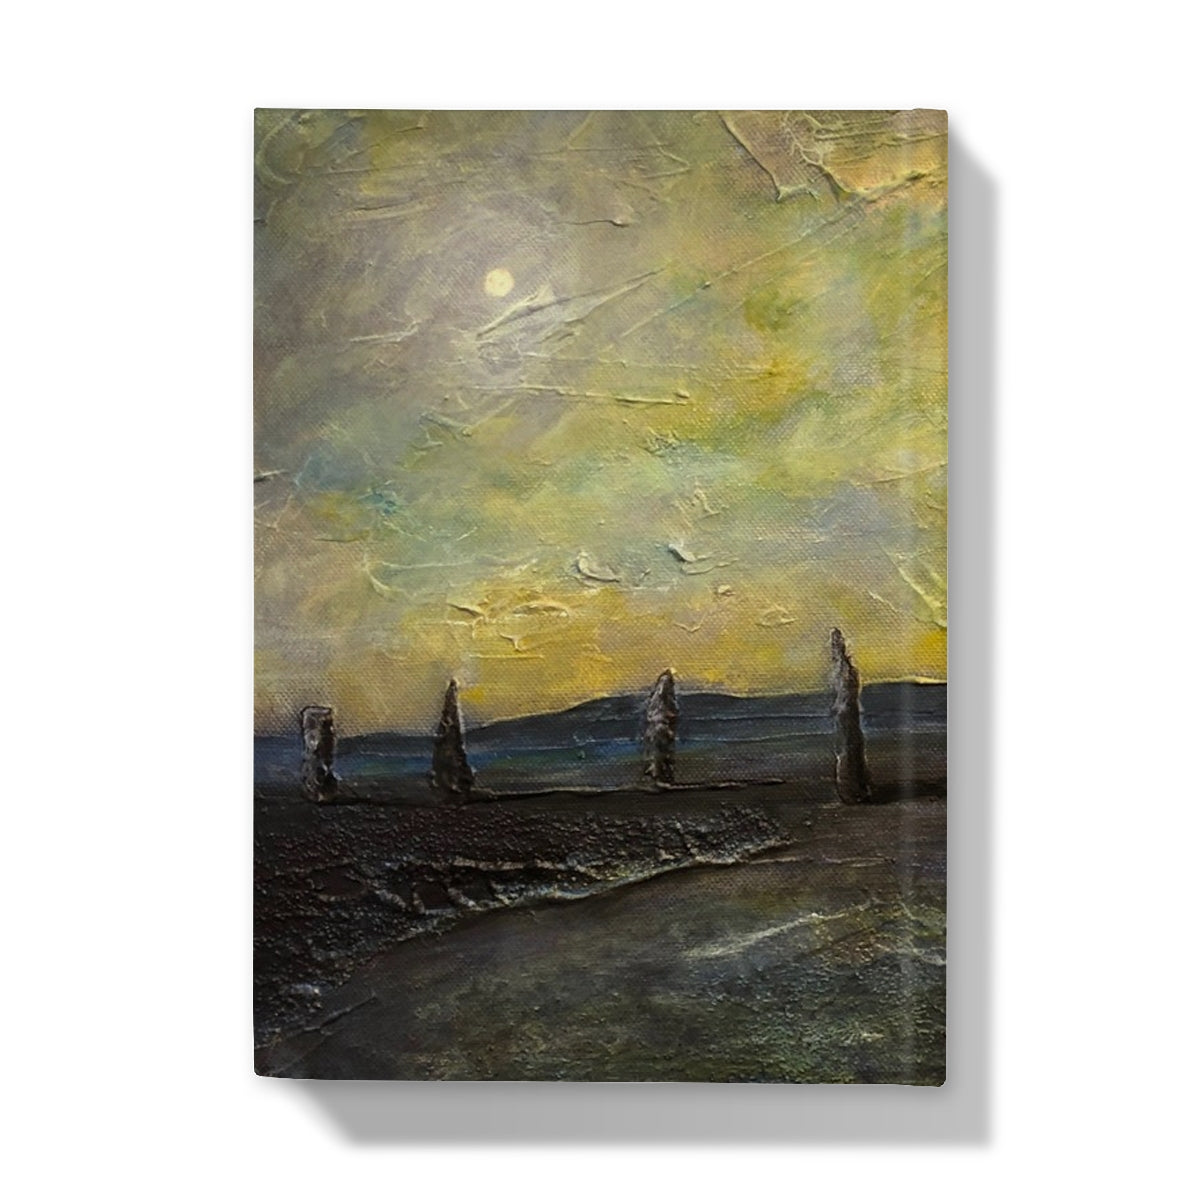 An Ethereal Ring Of Brodgar Art Gifts Hardback Journal-Journals & Notebooks-Orkney Art Gallery-Paintings, Prints, Homeware, Art Gifts From Scotland By Scottish Artist Kevin Hunter